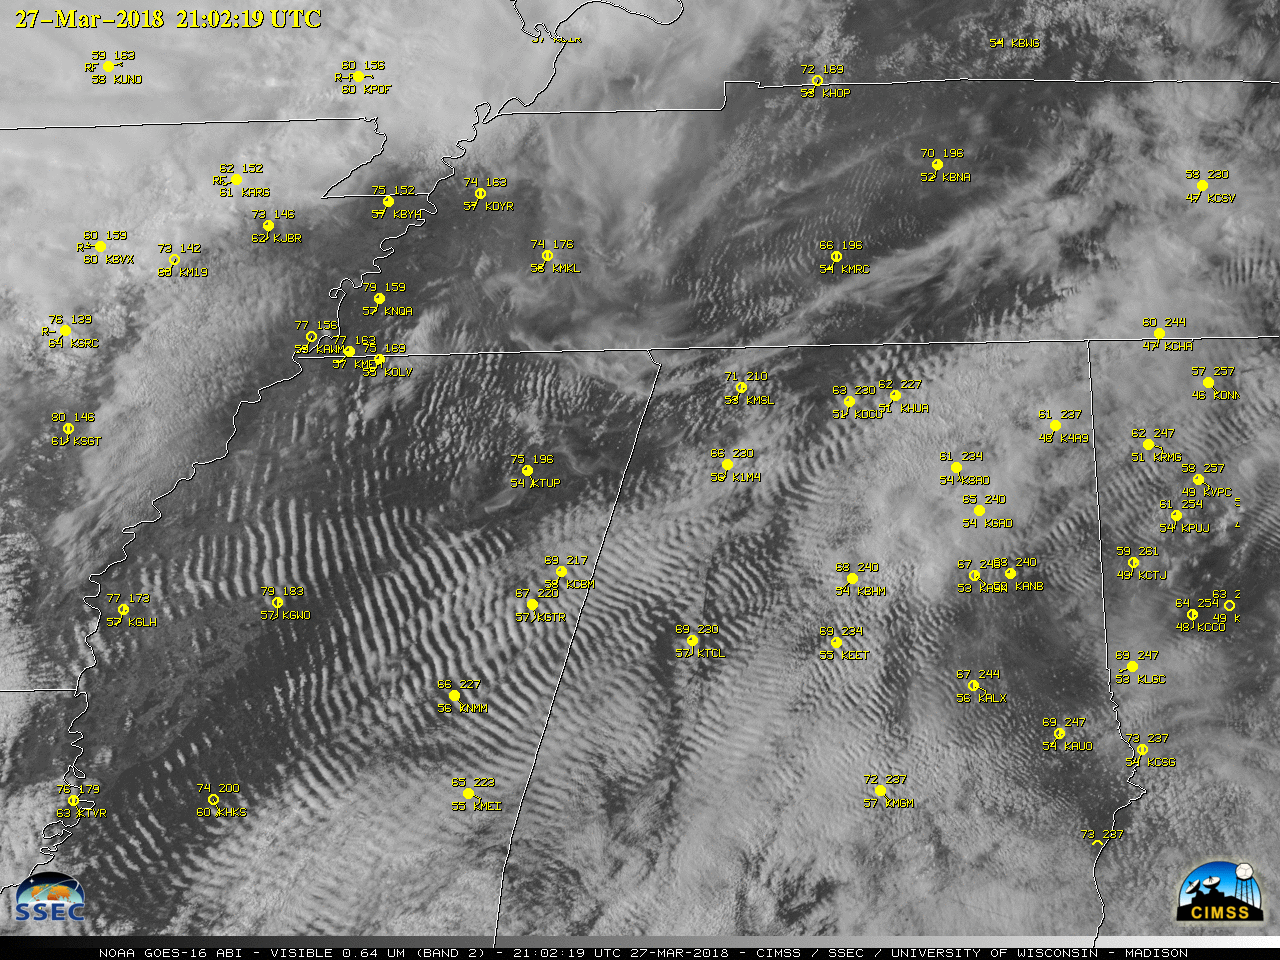 GOES-16 "Red" Visible (0.64 µm) images, with hourly surface observations plotted in yellow [click to play MP4 animation | Animated GIF also available]